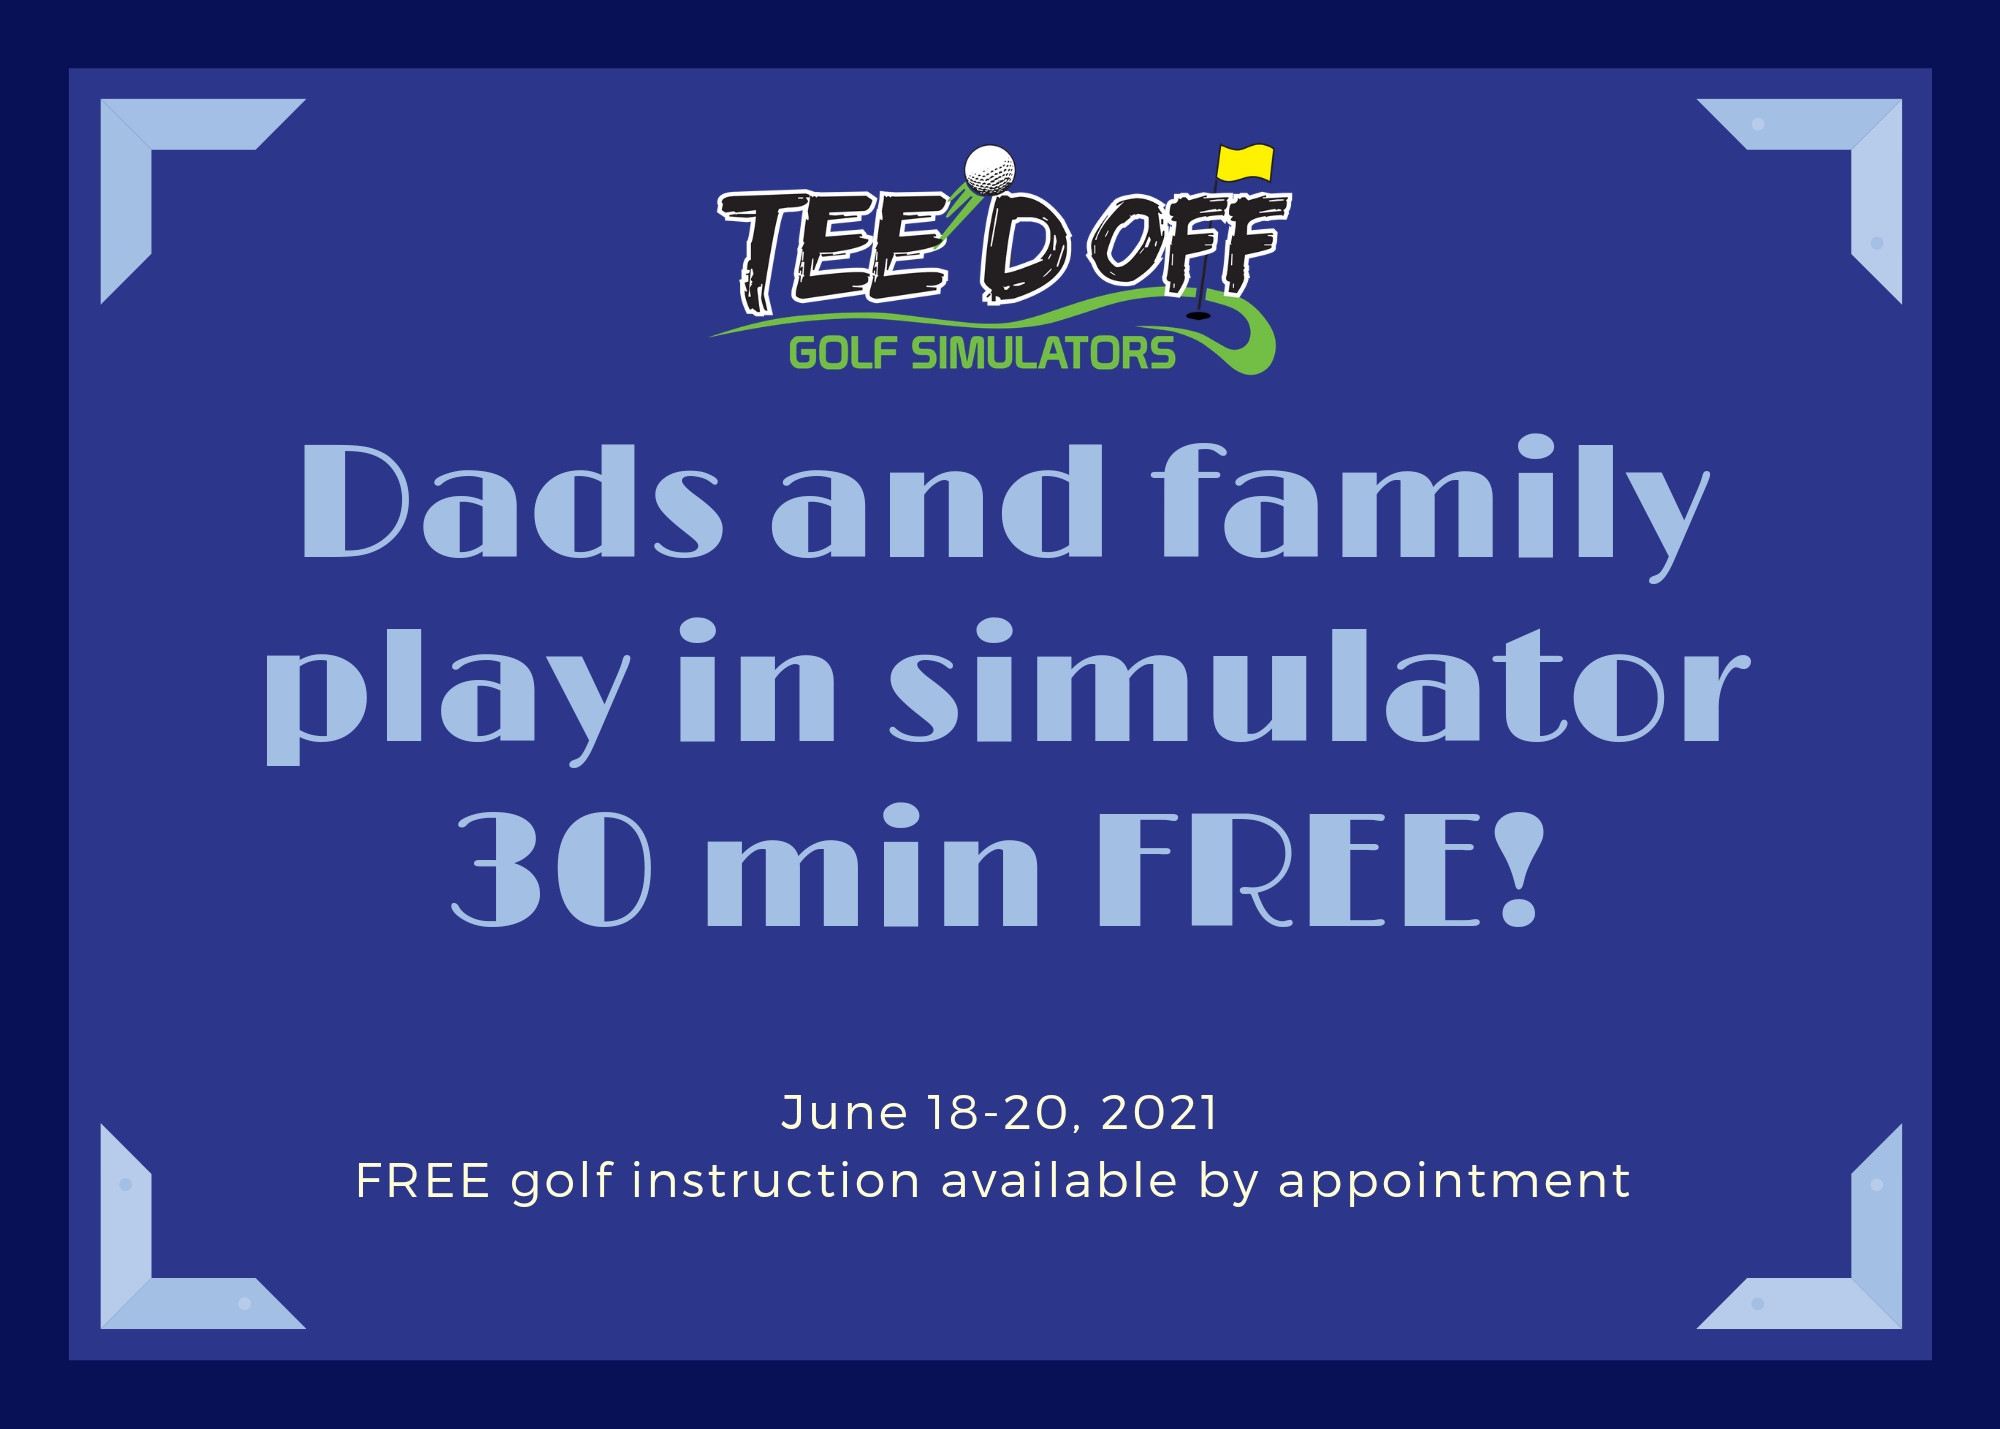 Father’s Day weekend special at Teed Off Golf Simulators